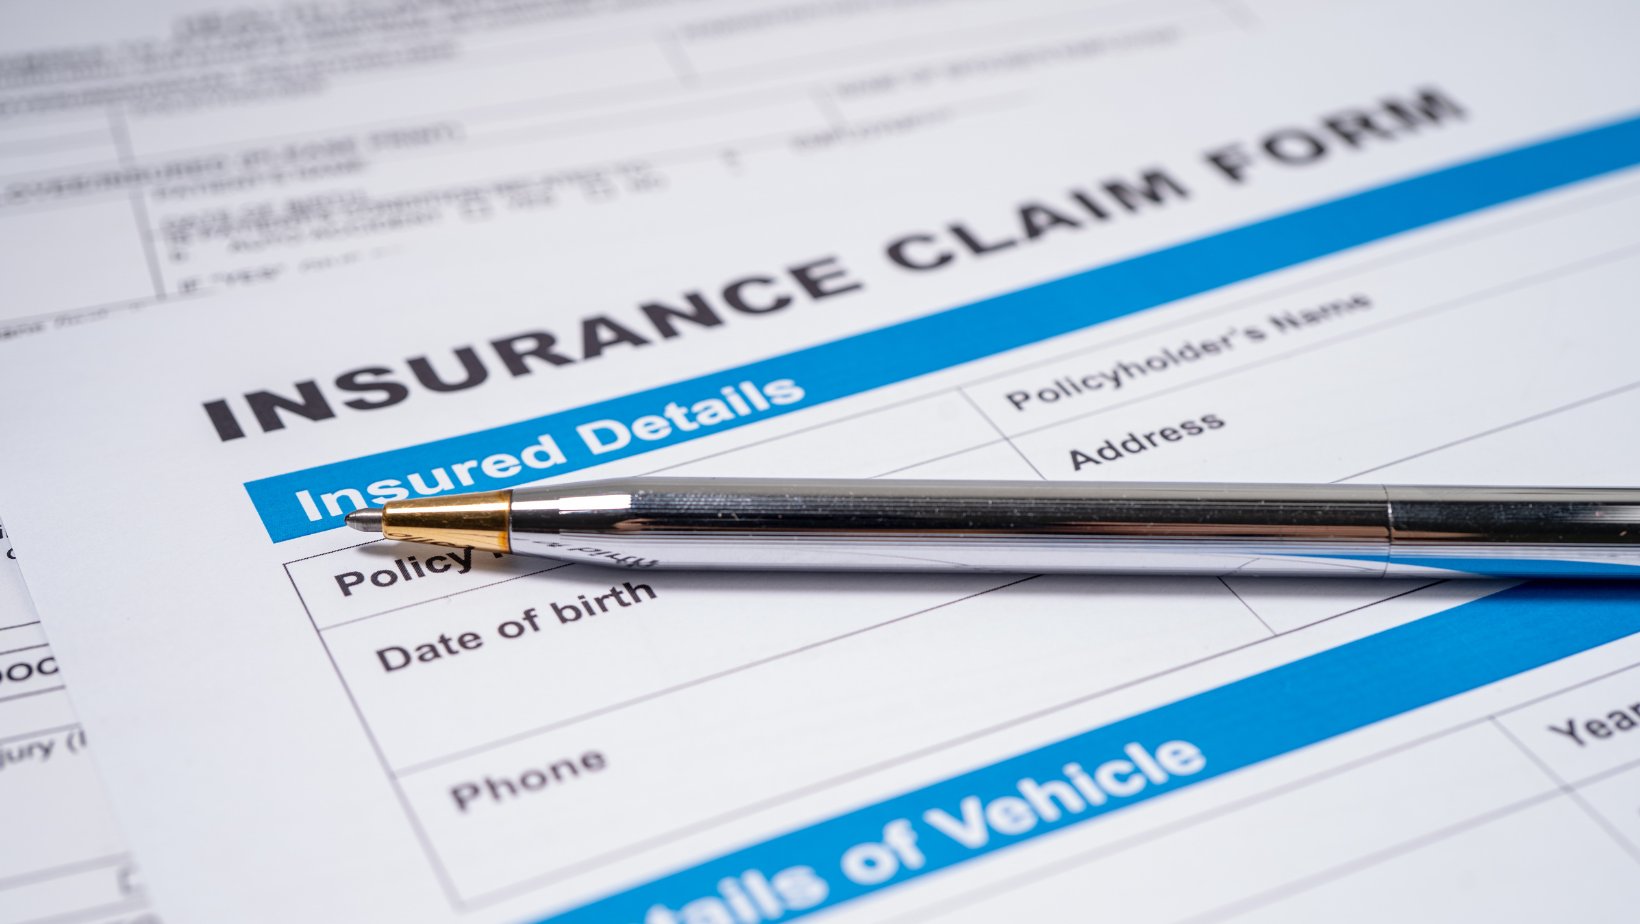 What to consider when choosing insurance coverage